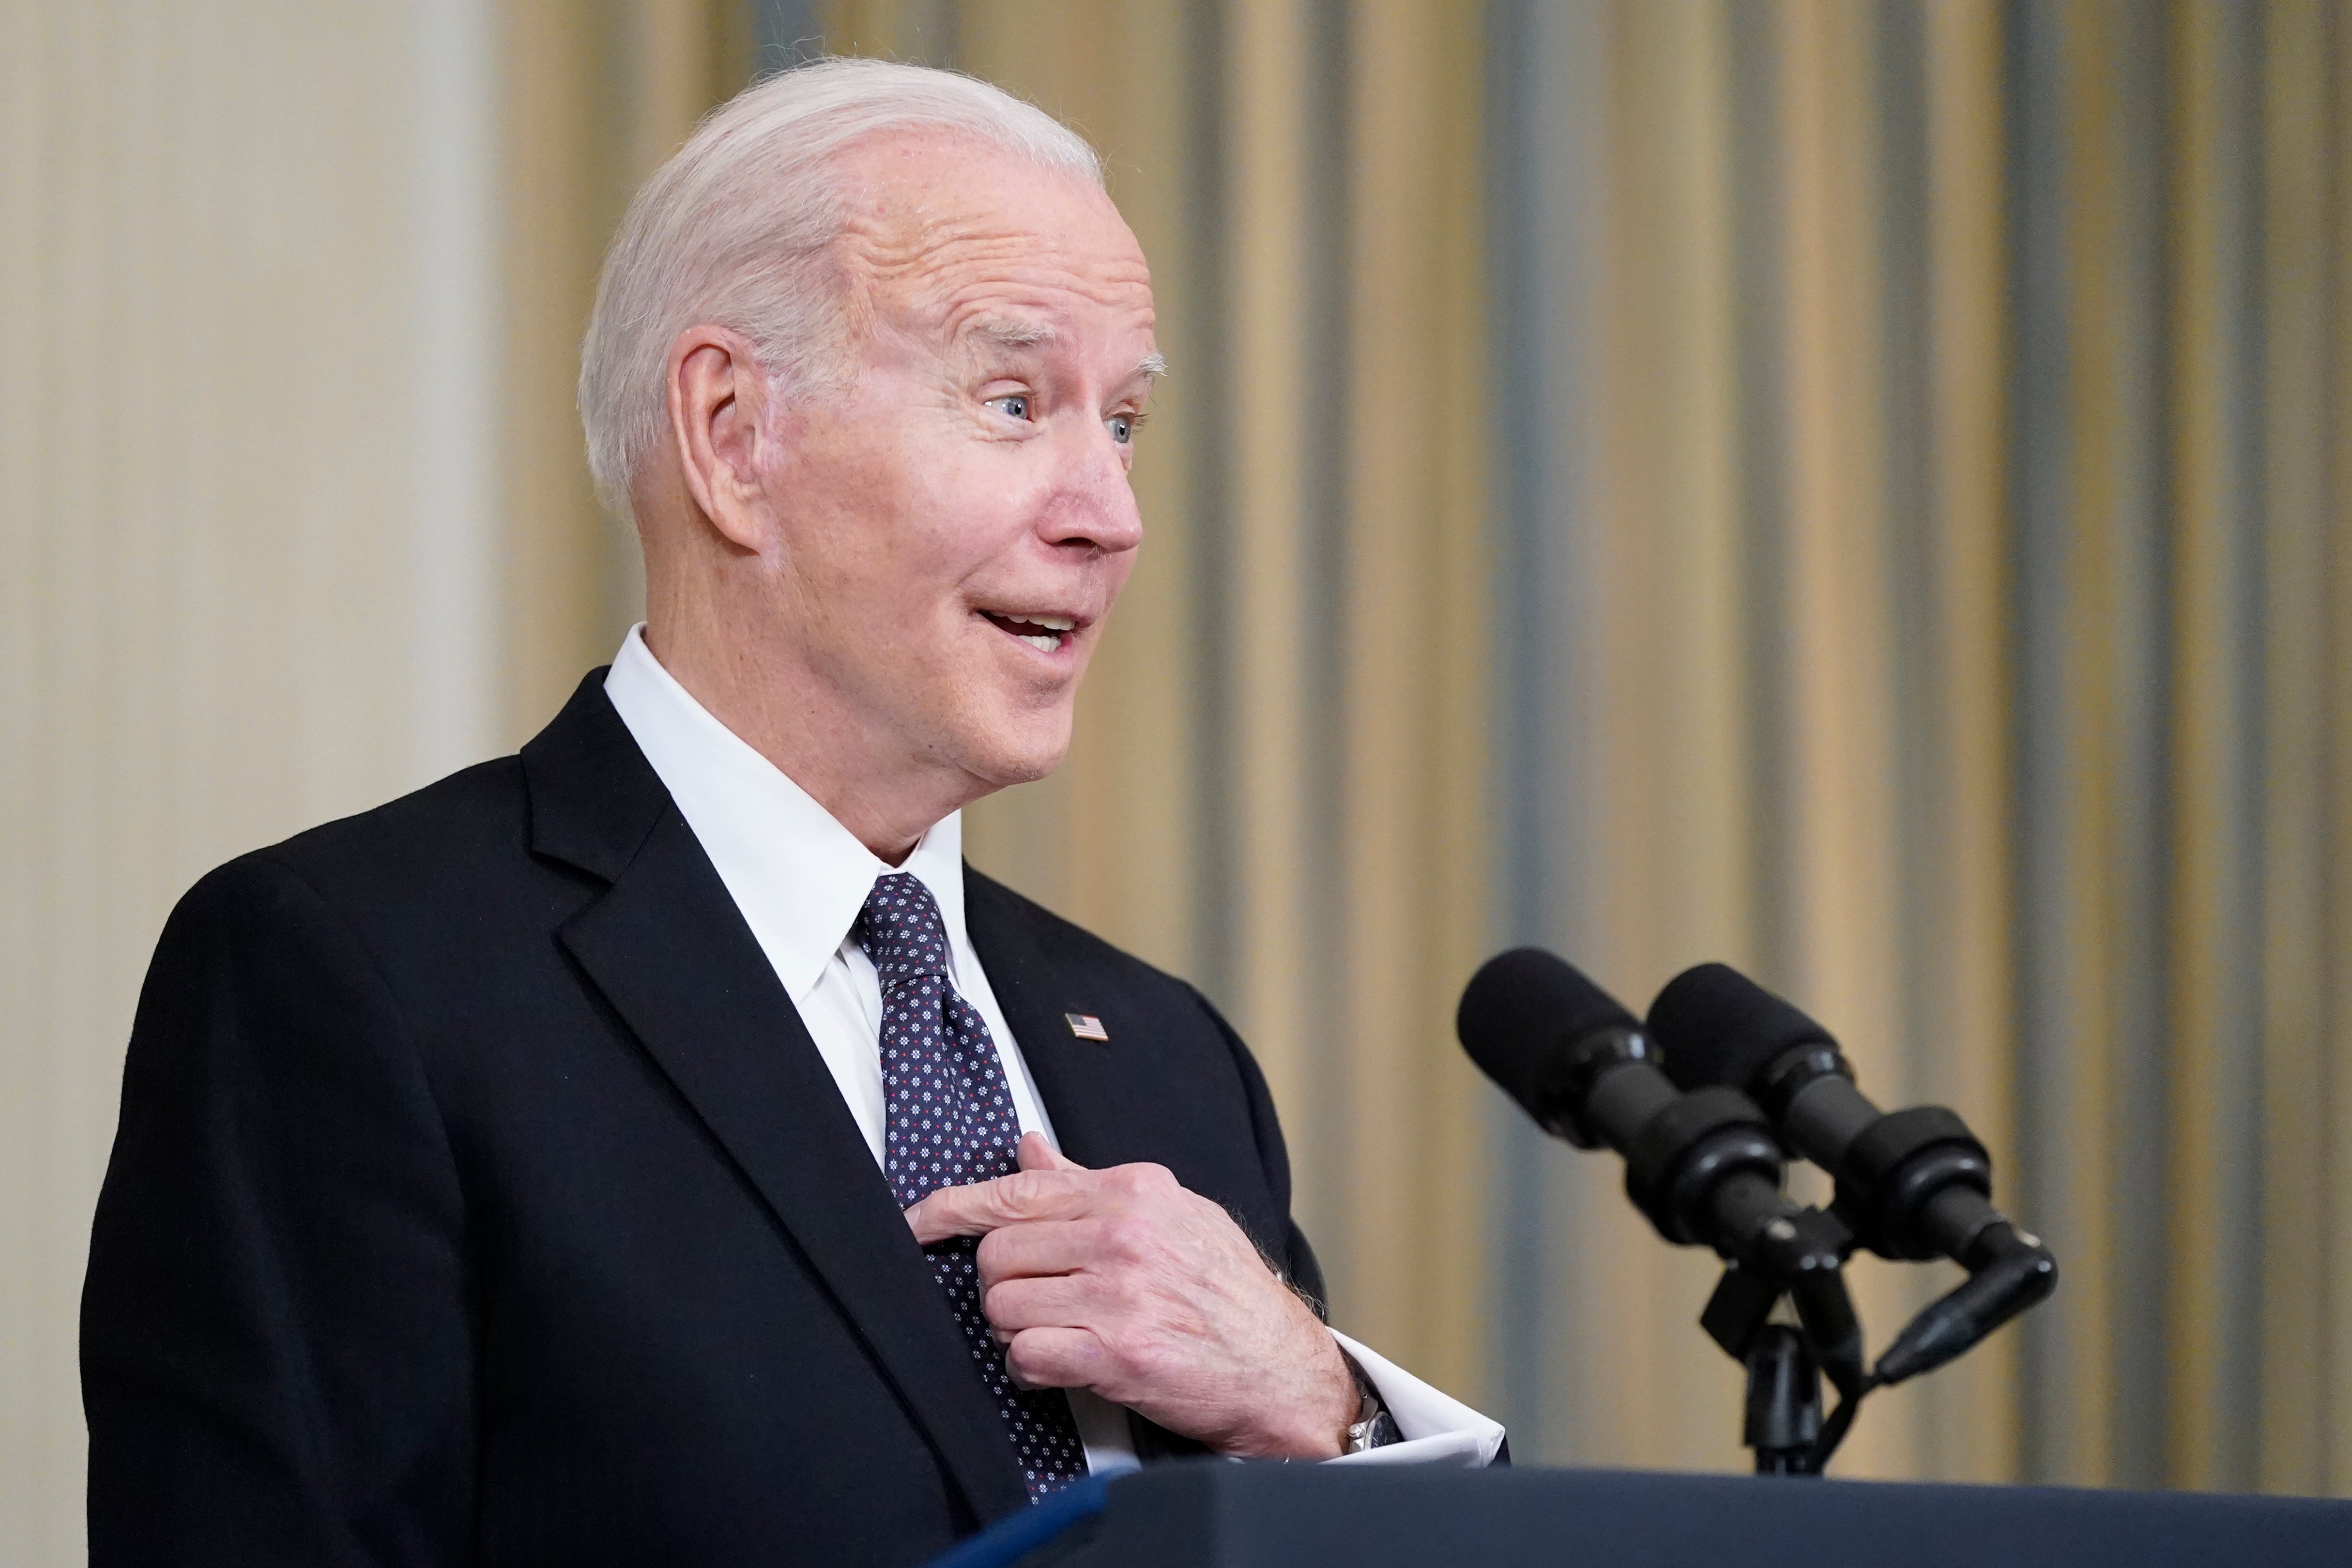 Biden has backed Ukraine but refused to impose a no-fly zone